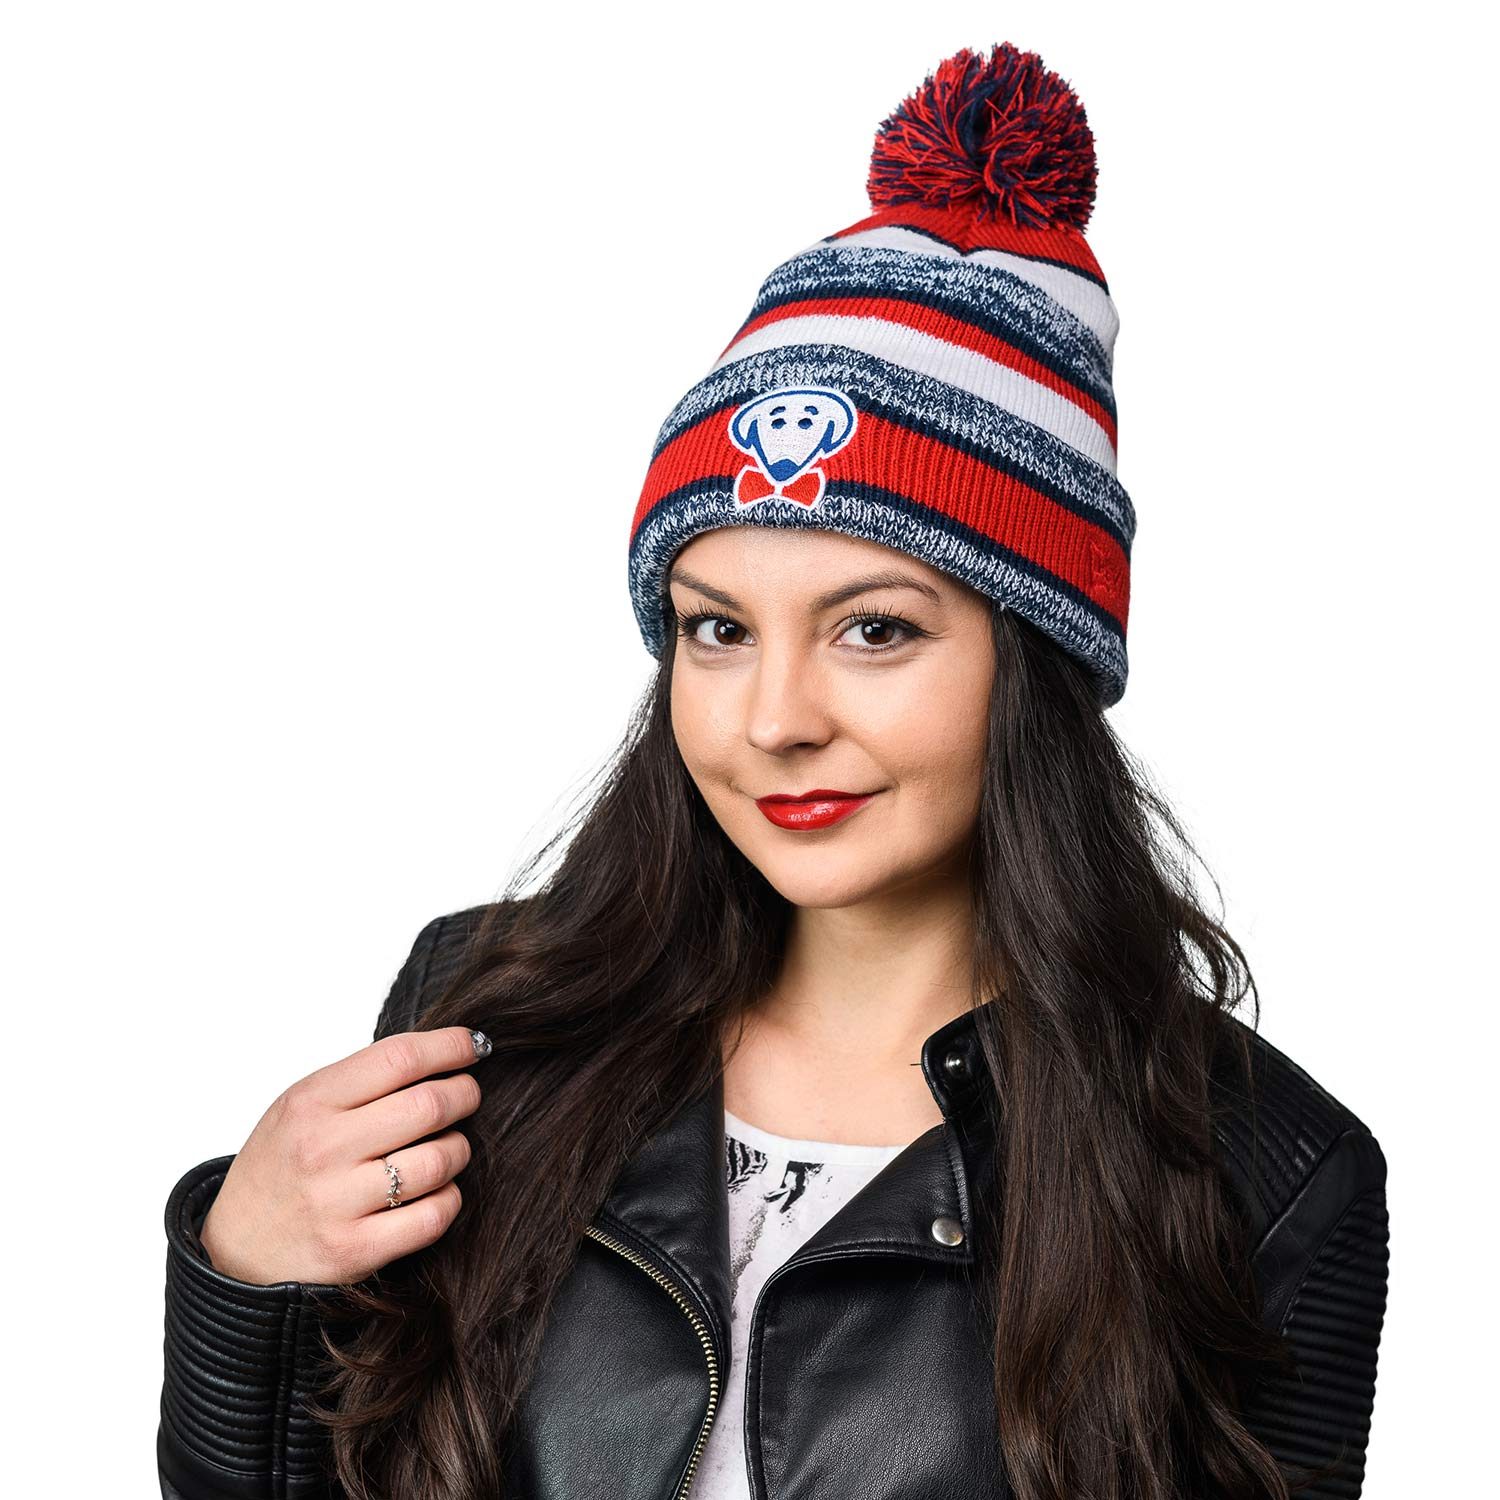 She looks this good AND she's staying warm! - Mosi winter knit hat by Beau Tyler